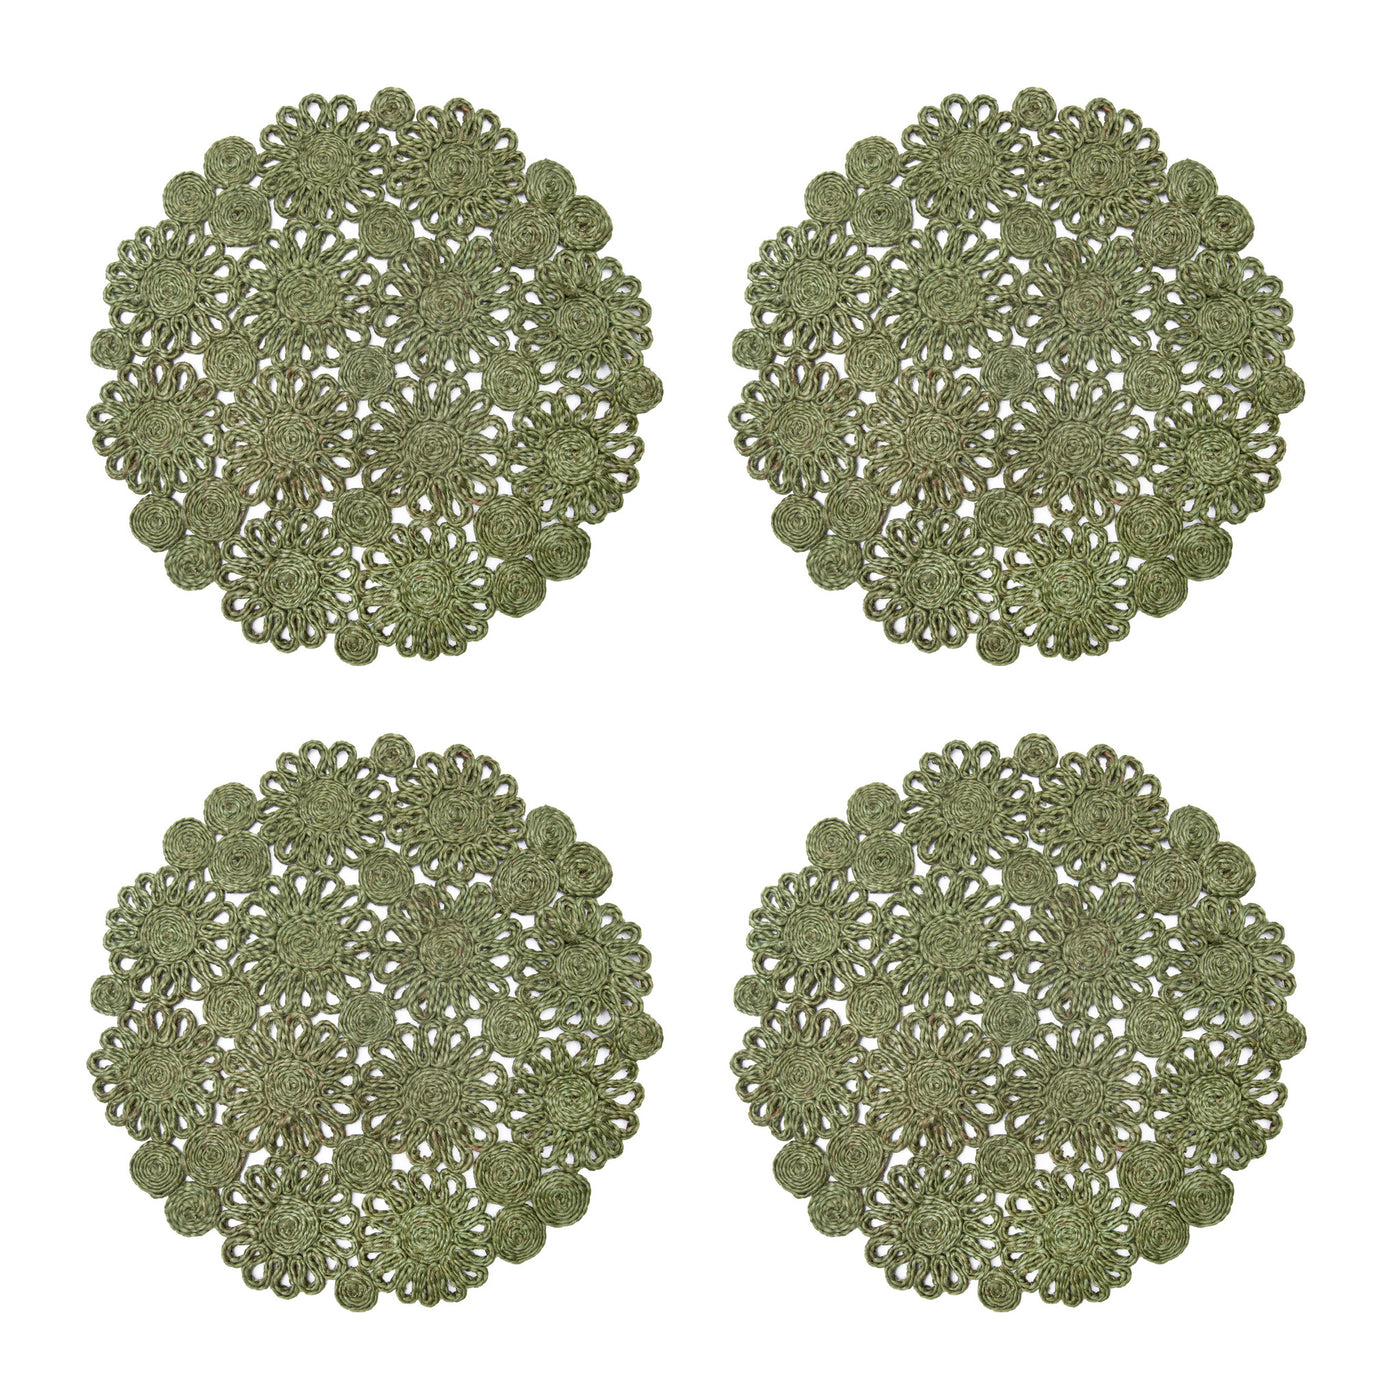 Daisy Jute Green Placemat 15" Round - Set of 4